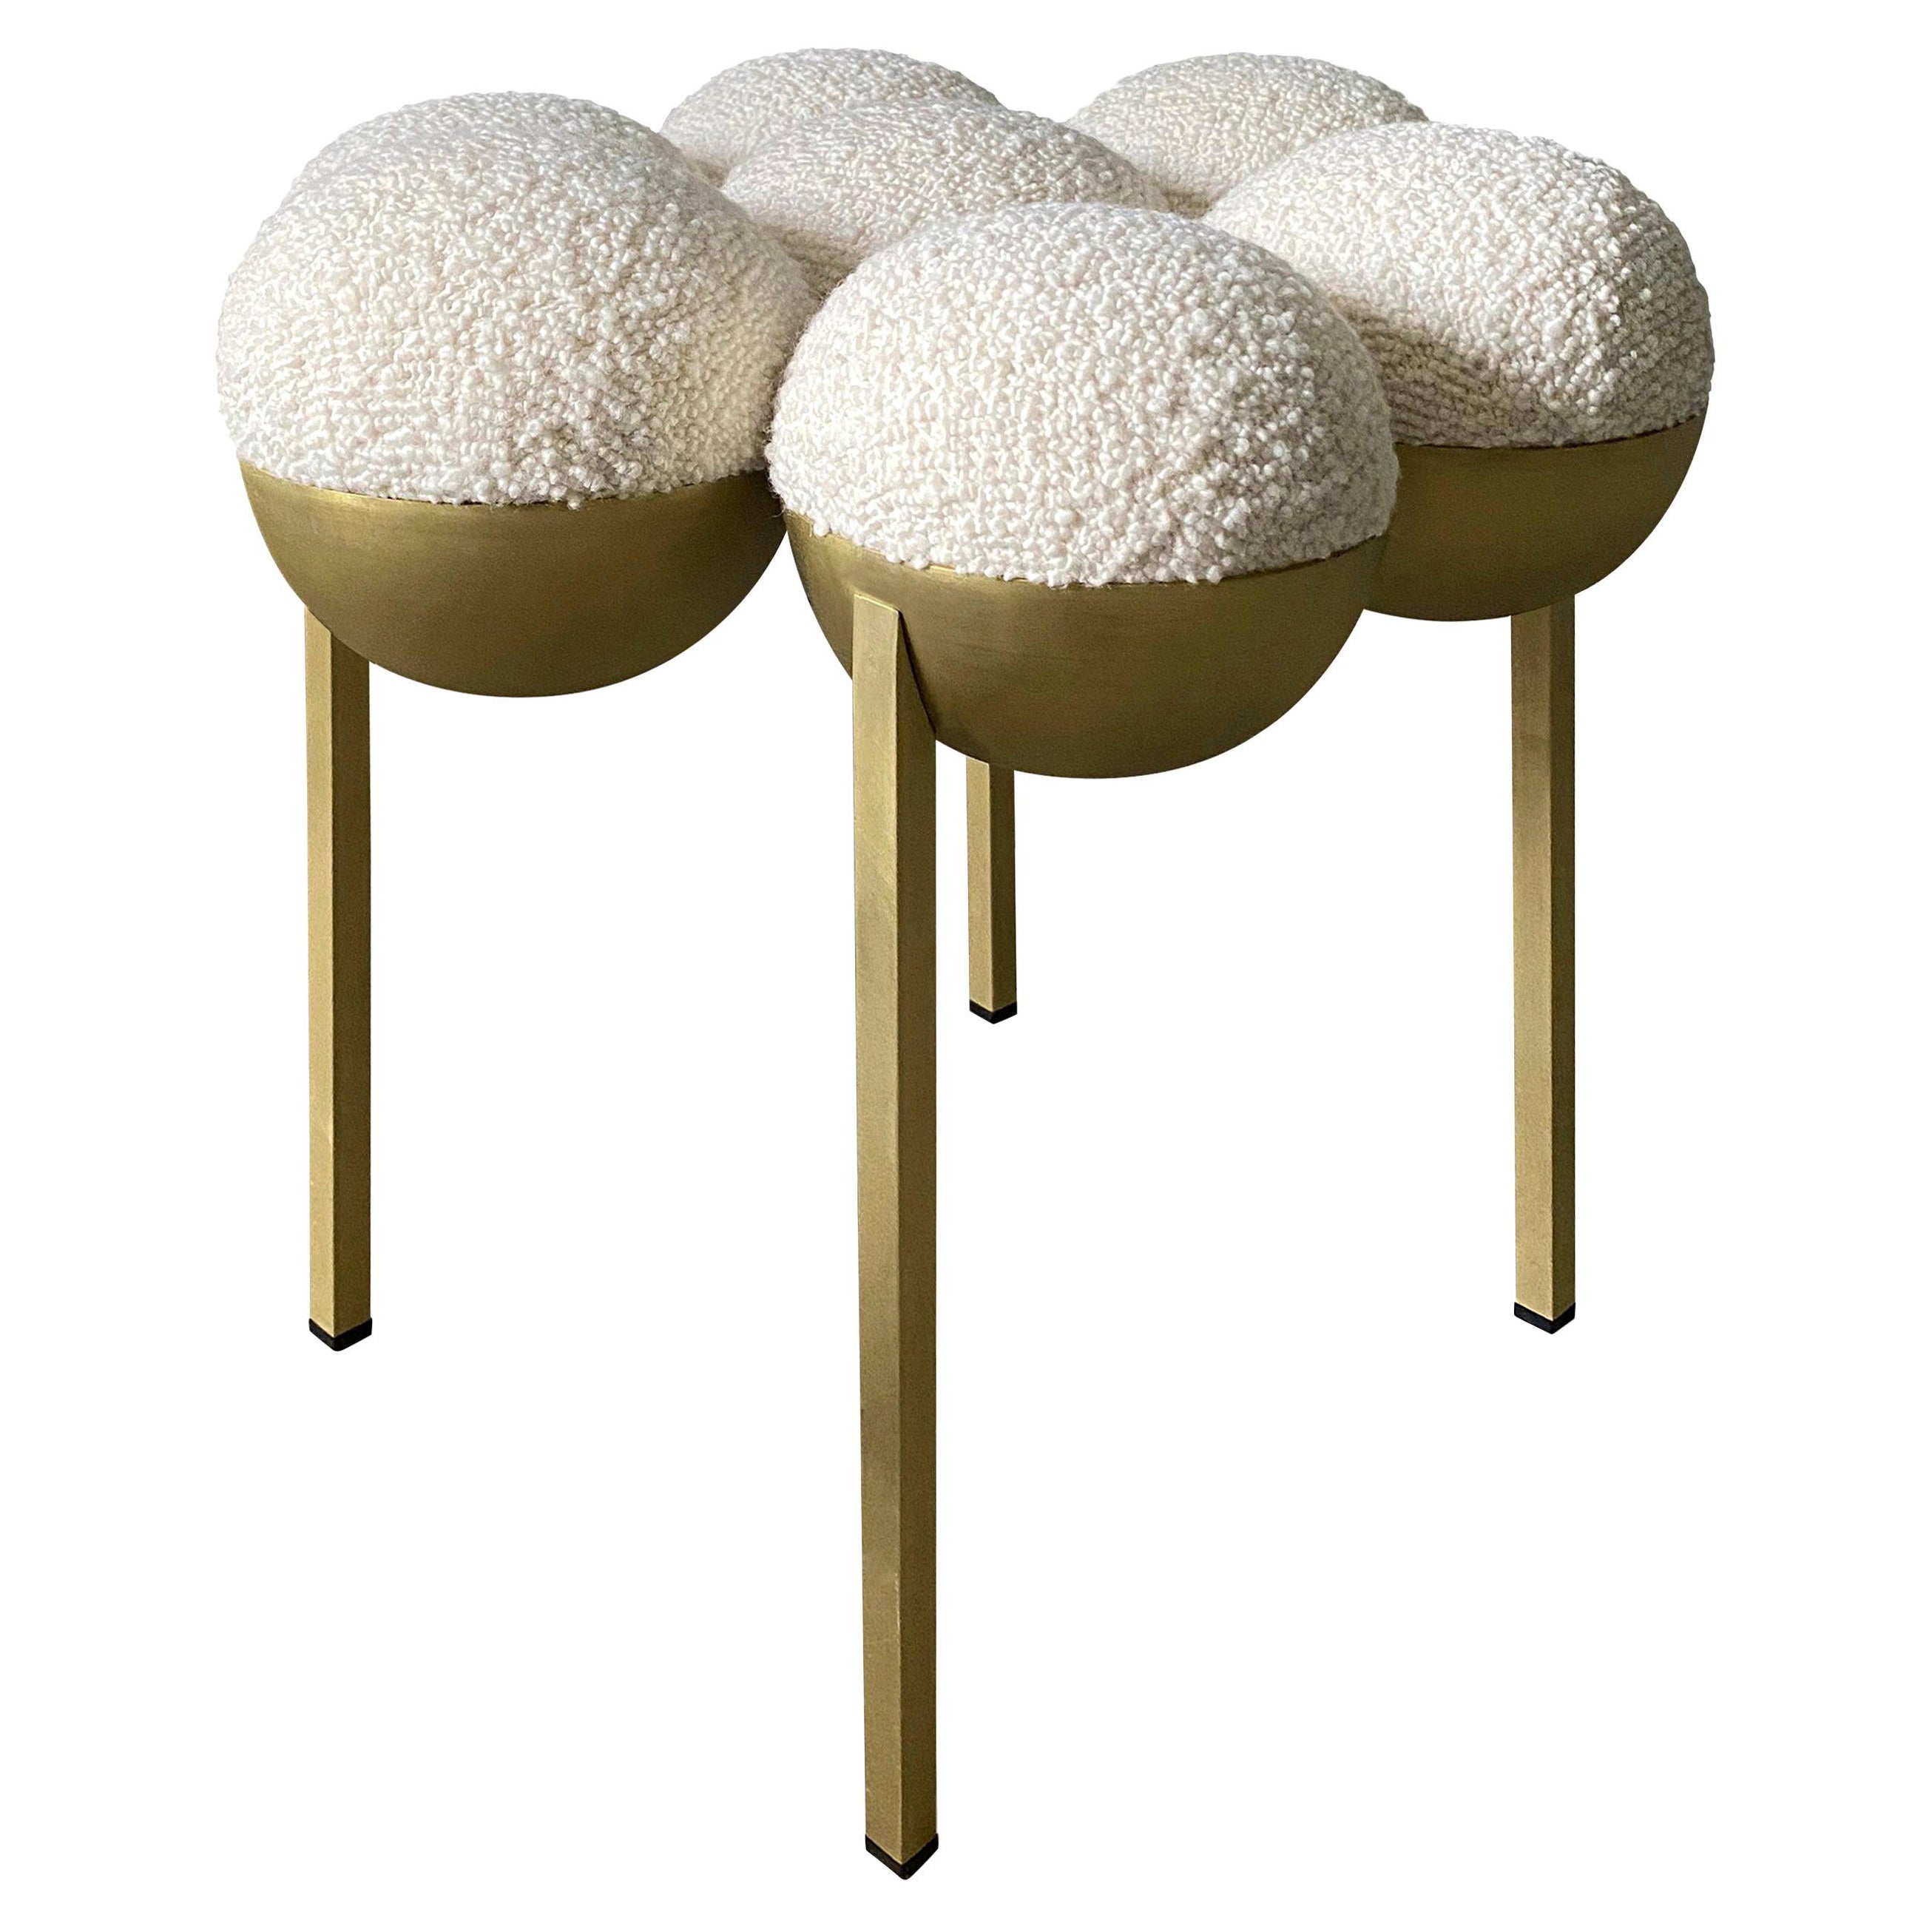 The Saturn pouffe utilises gathered bilboquet seat construction, to create a more simplified but still incredibly distinctive form. The 

The Saturn pouffe utilises gathered bilboquet seat construction, to create a more simplified but still